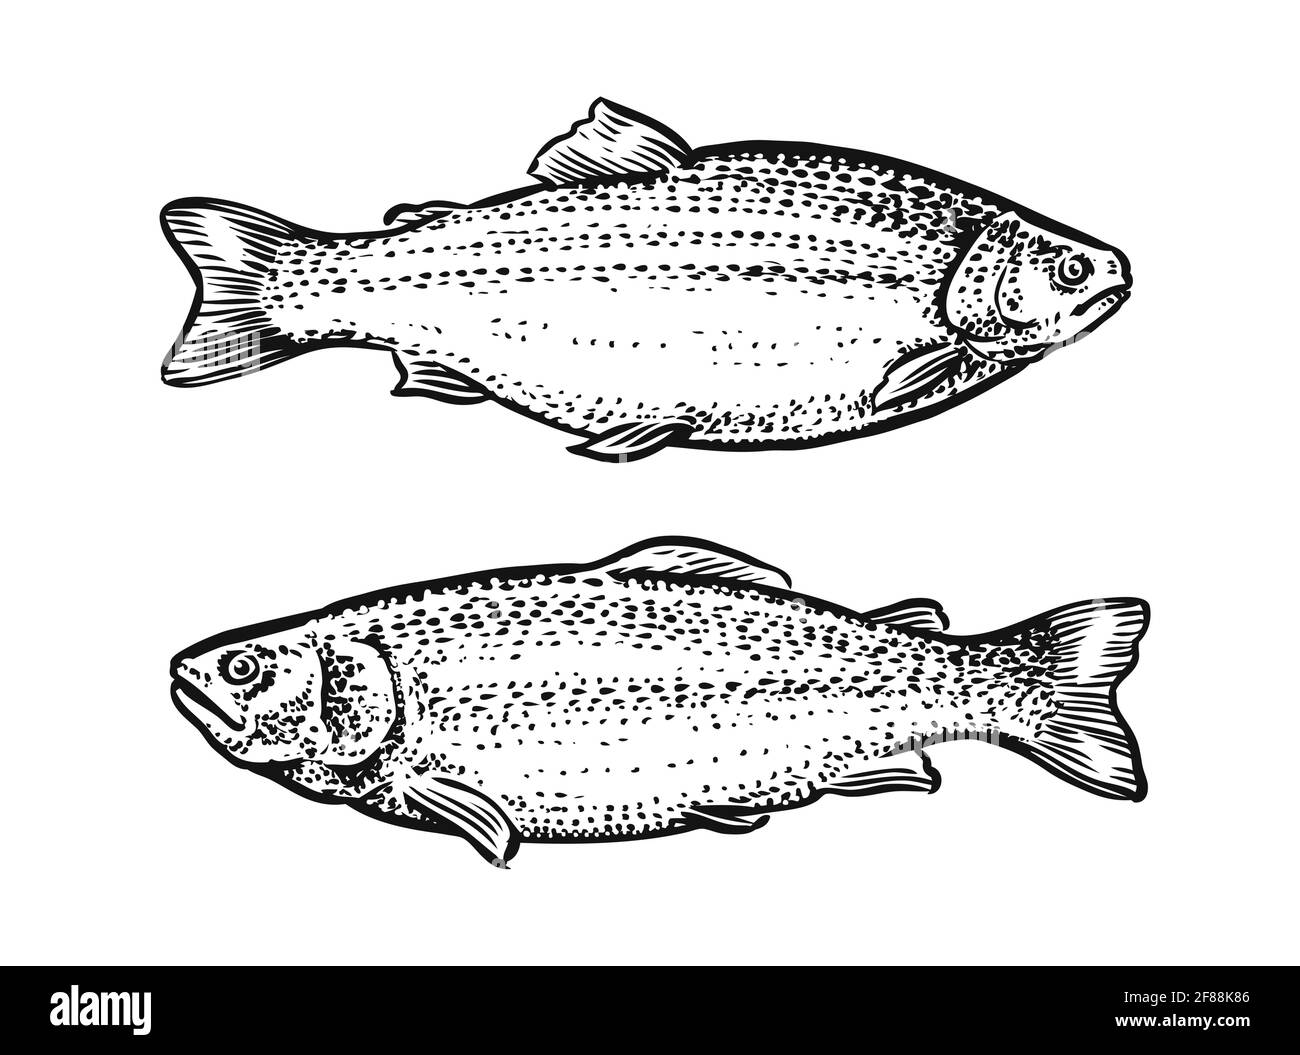 Sketch of fish. Hand drawn vector illustration of trout, salmon isolated on white background Stock Vector